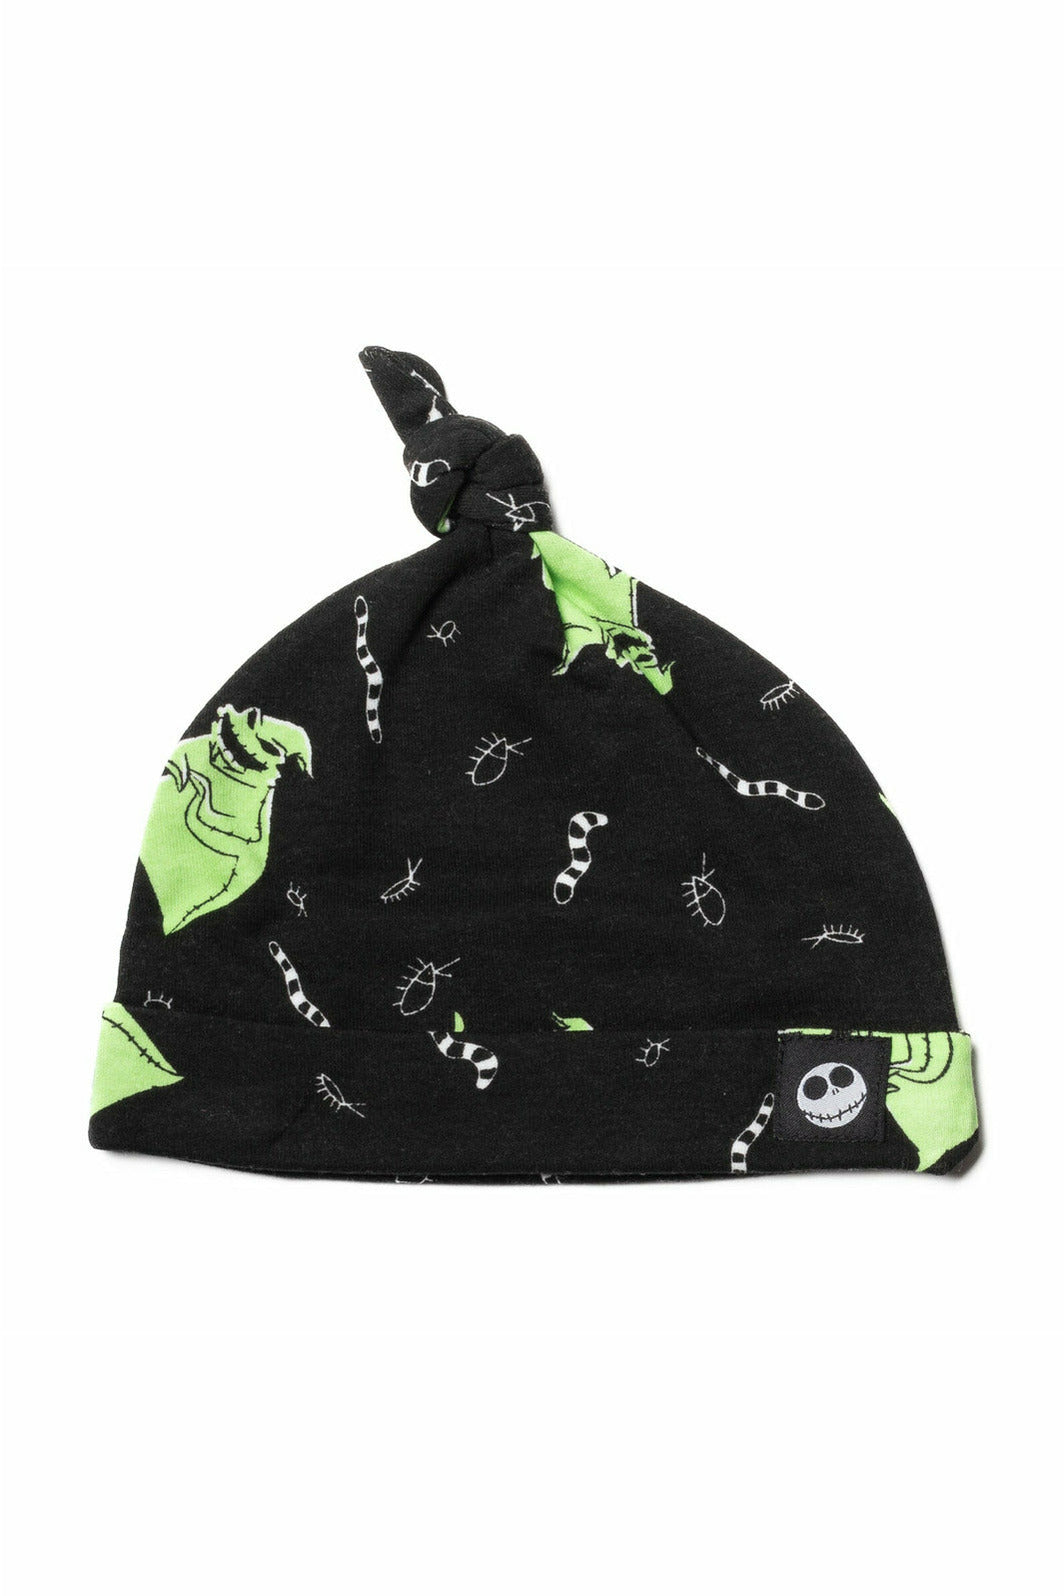 Nightmare Before Christmas Oogie Boogie 3 Piece Outfit Set: Cuddly Bodysuit Pants Hat